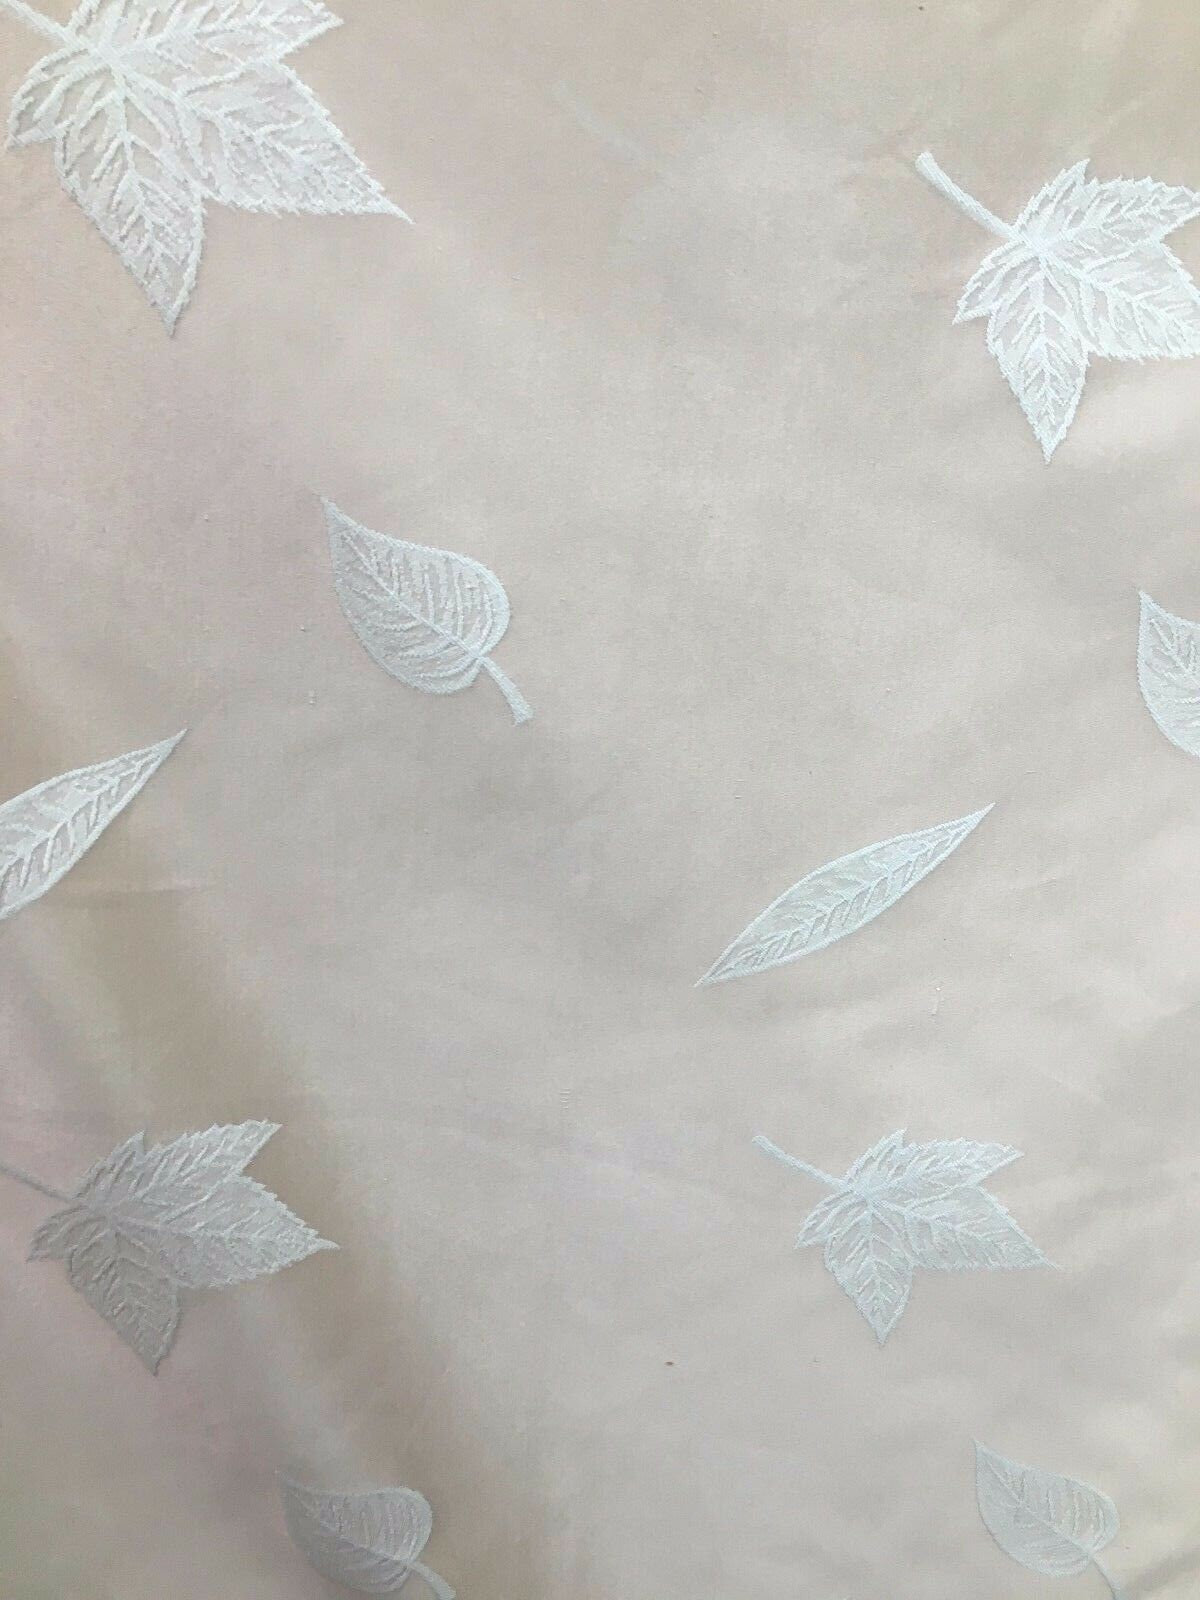 PEACH WHITE Leaves Brocade Upholstery Drapery Fabric (54 in.) Sold By The Yard